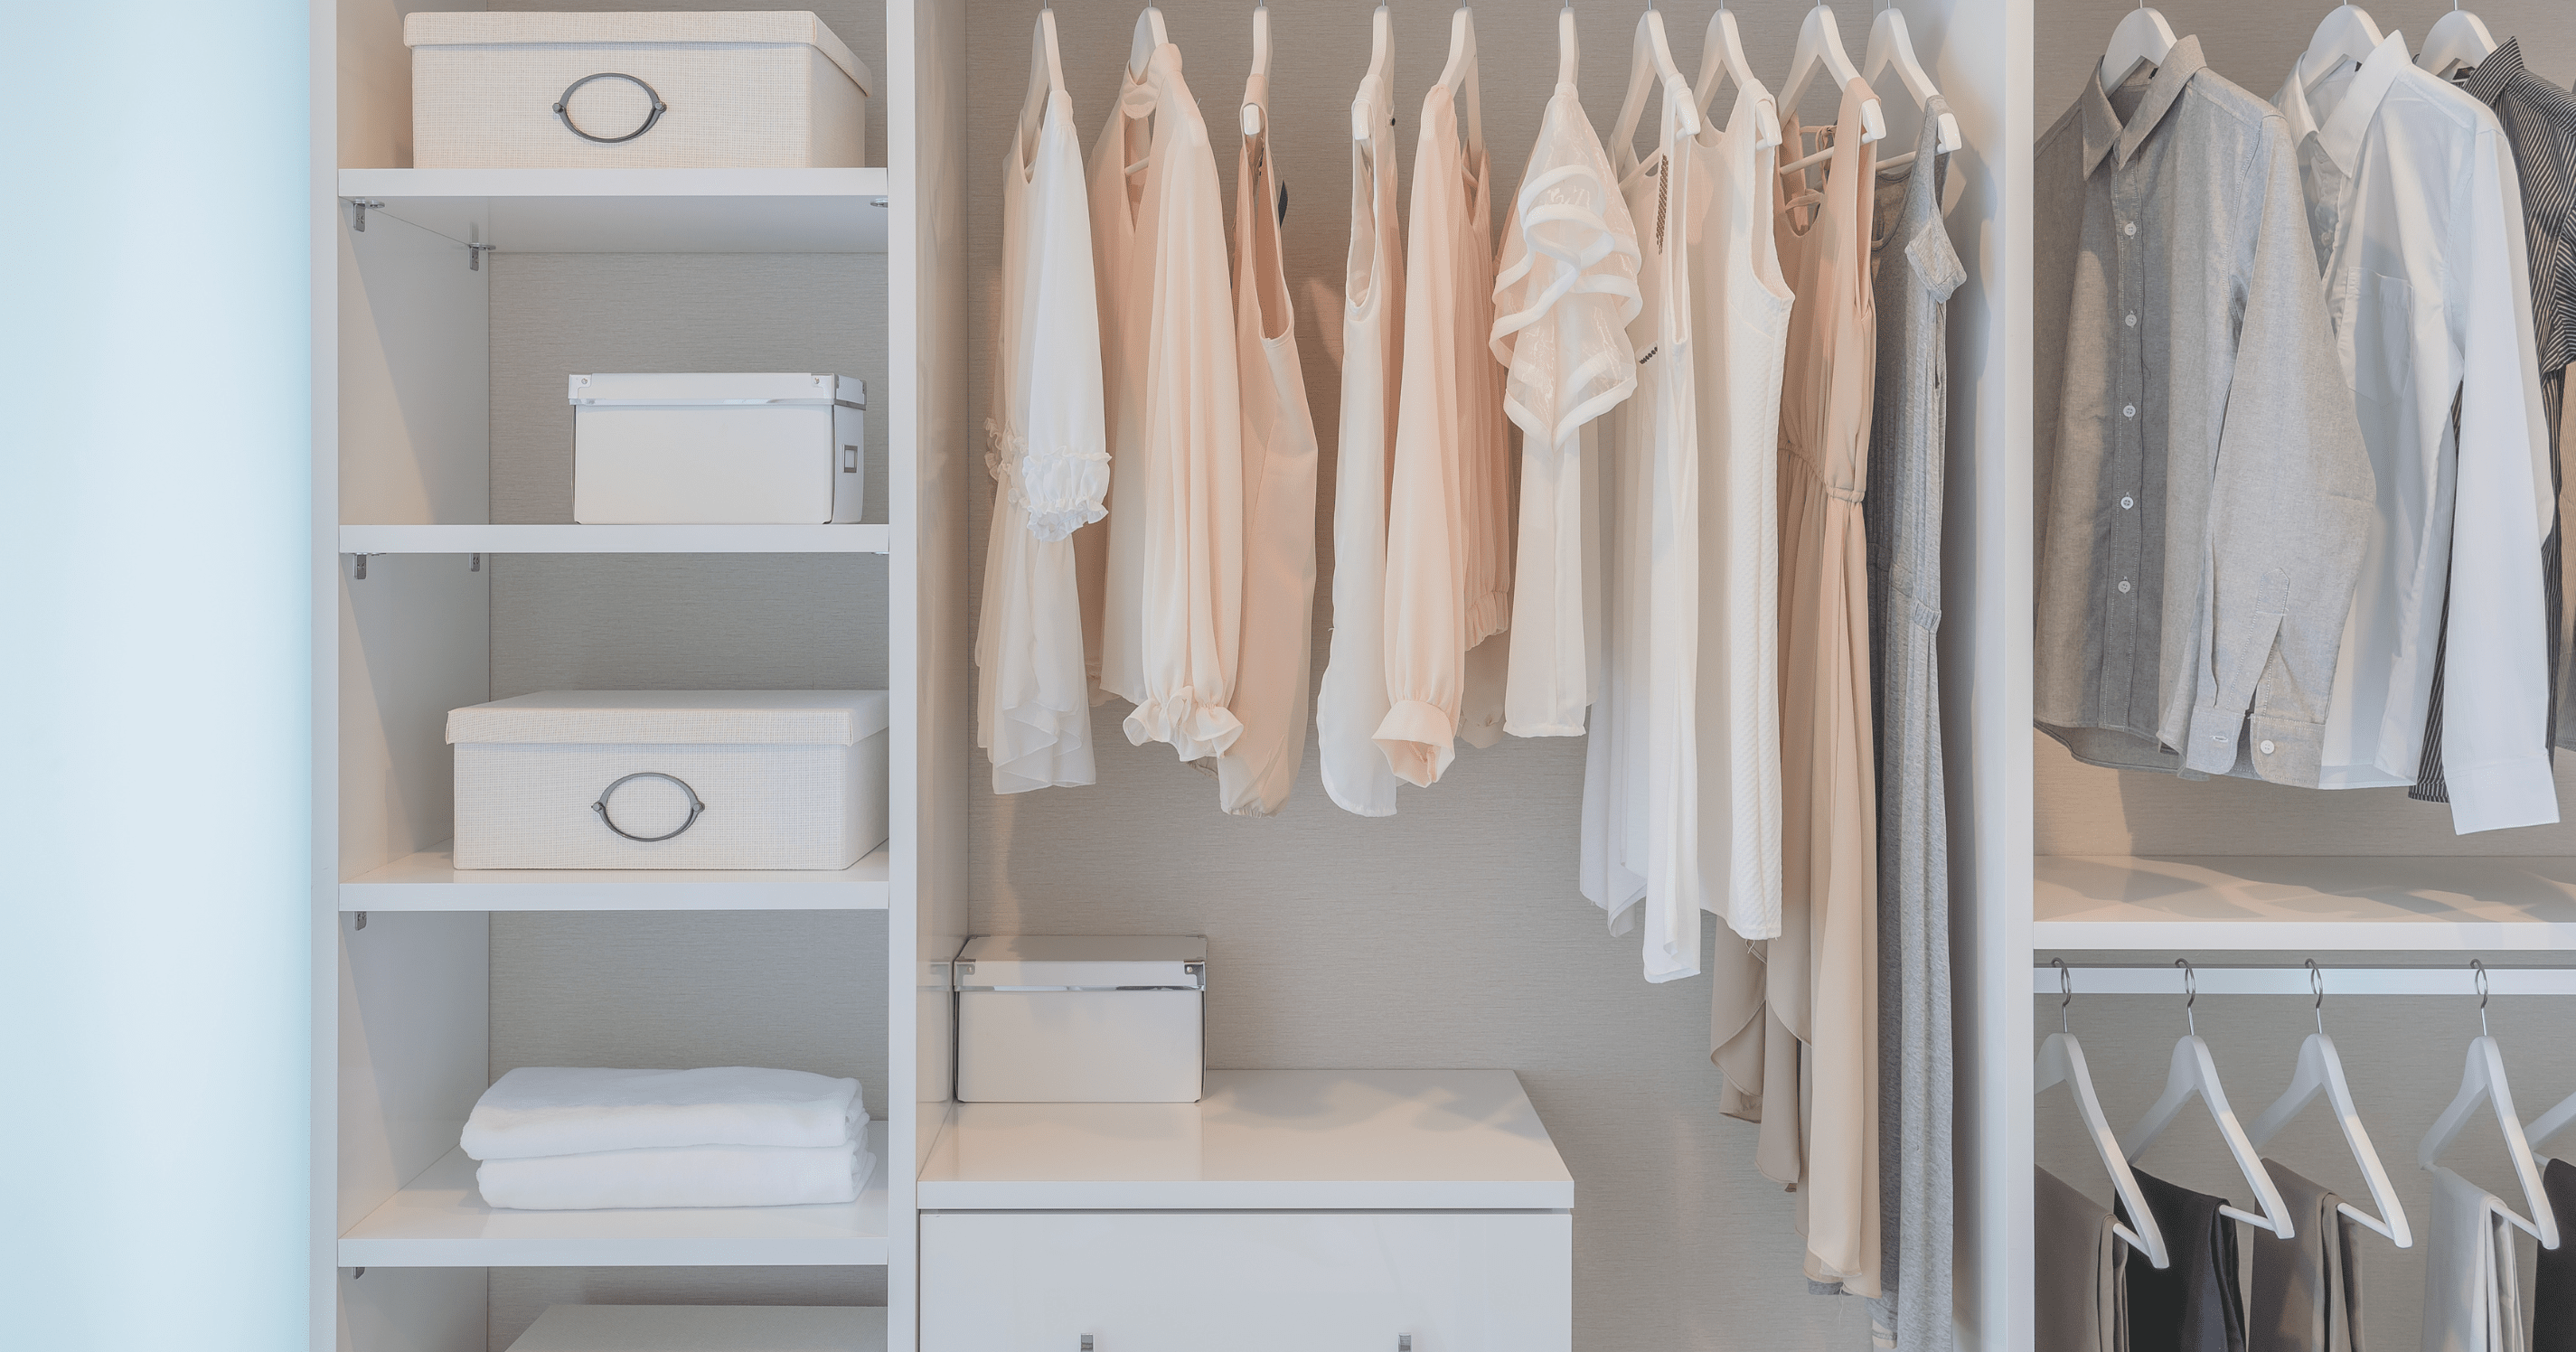 A stock image of a wardrobe - start your property search on Share to Buy!